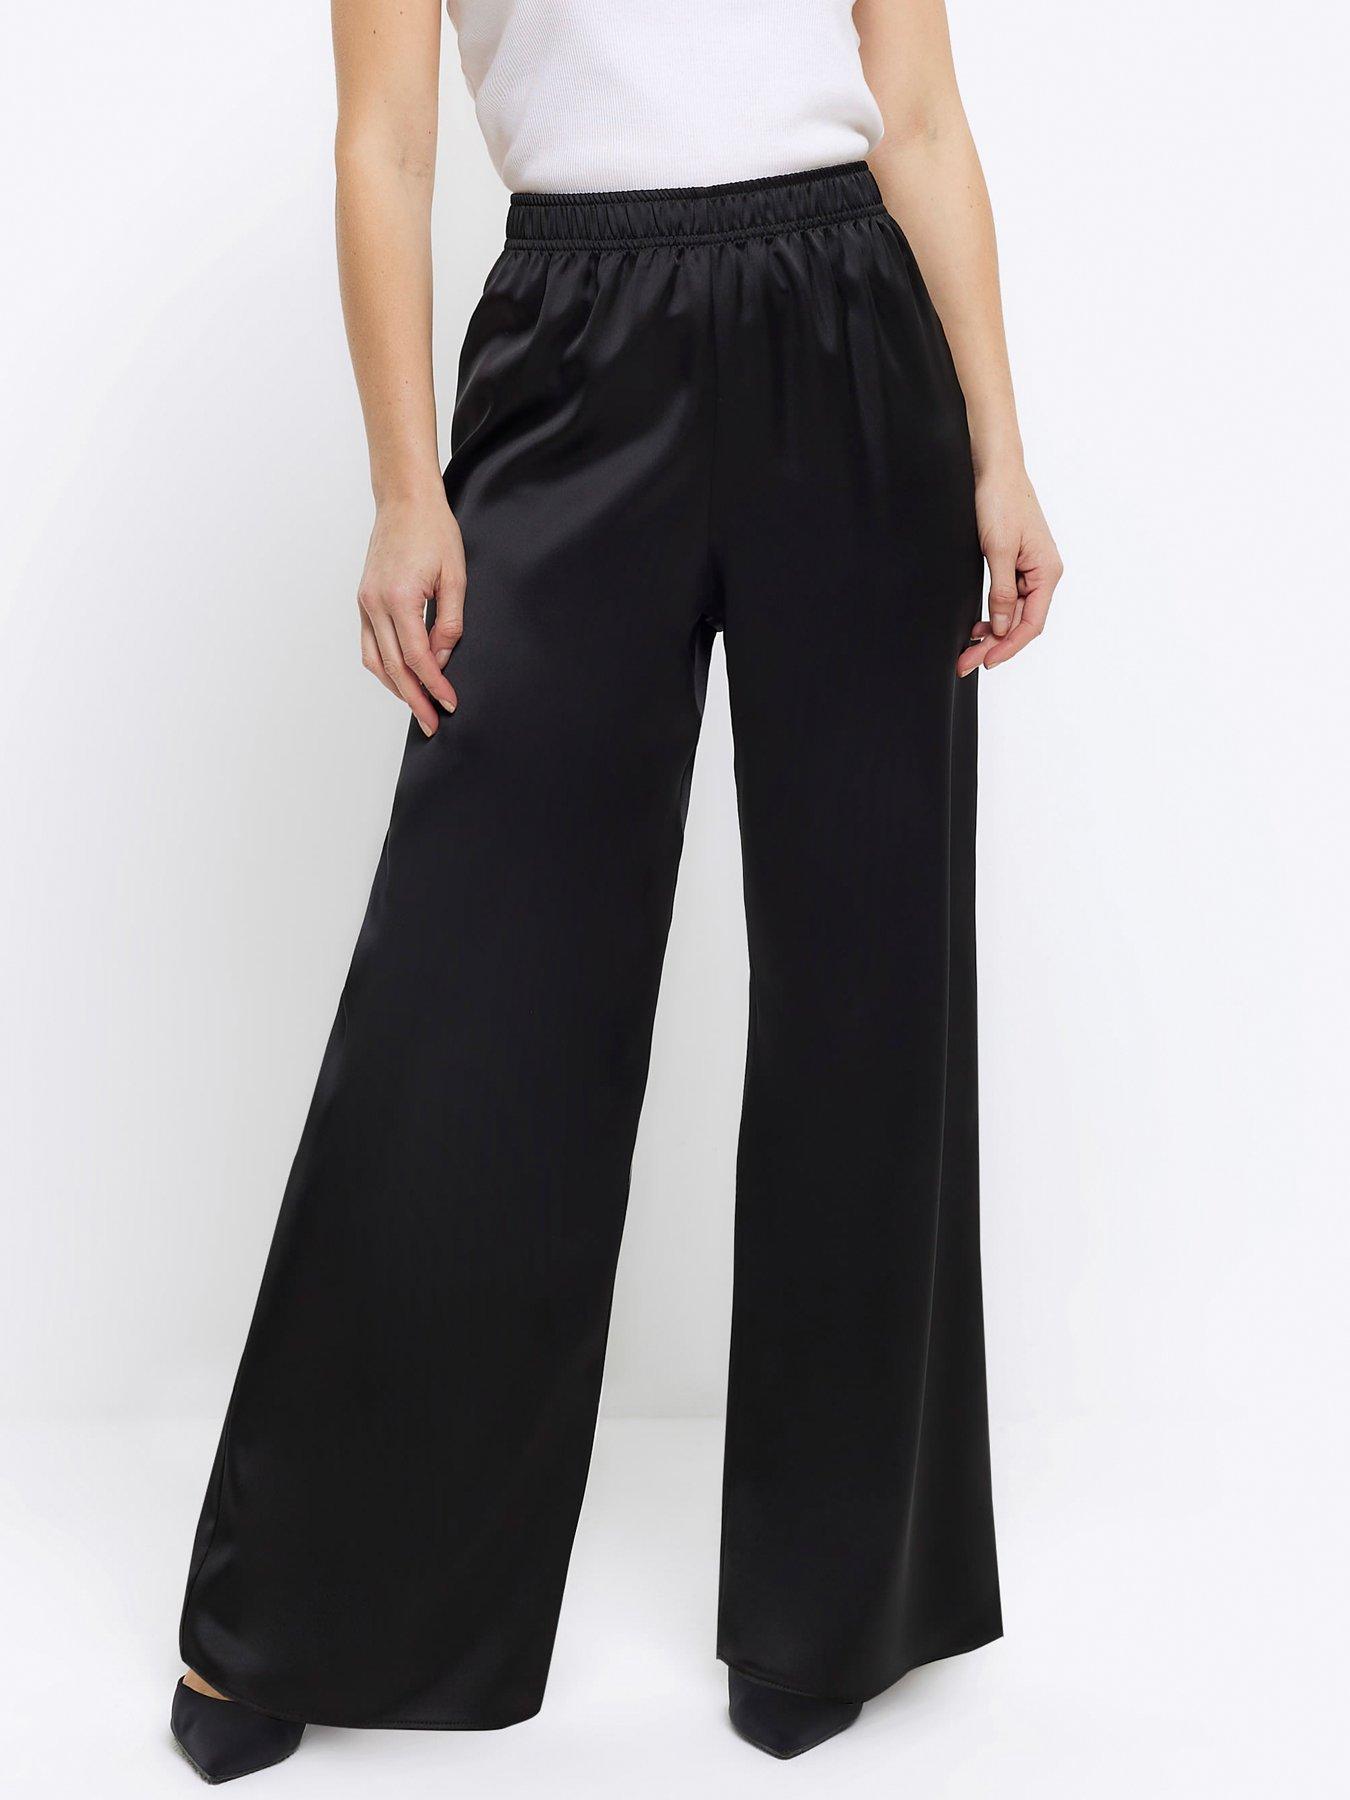 Long Tall Sally Ponte Trouser With Tie Waist 36inch - Black